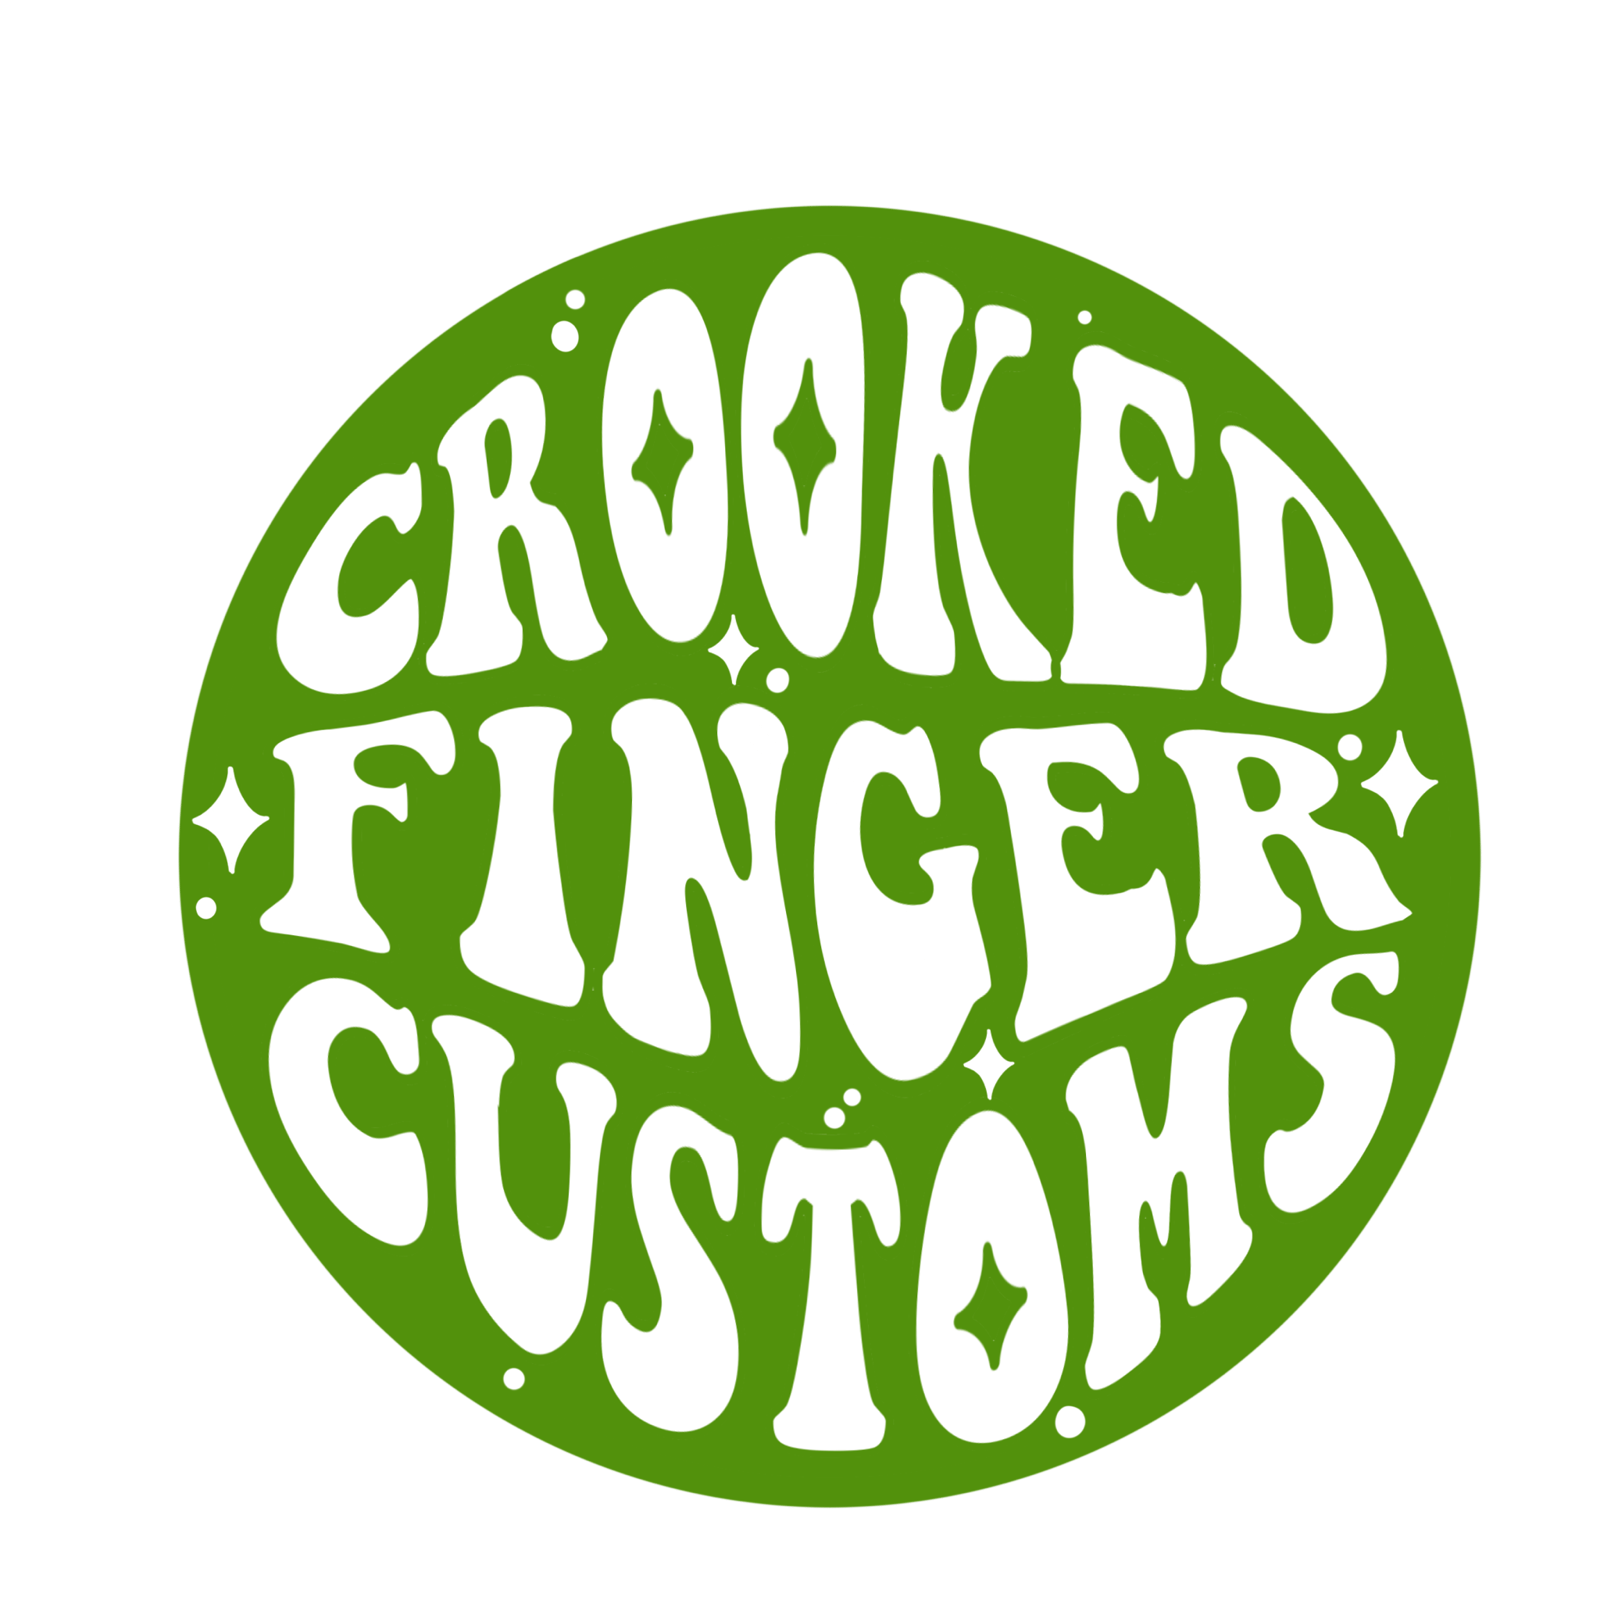 Crooked Finger Customs